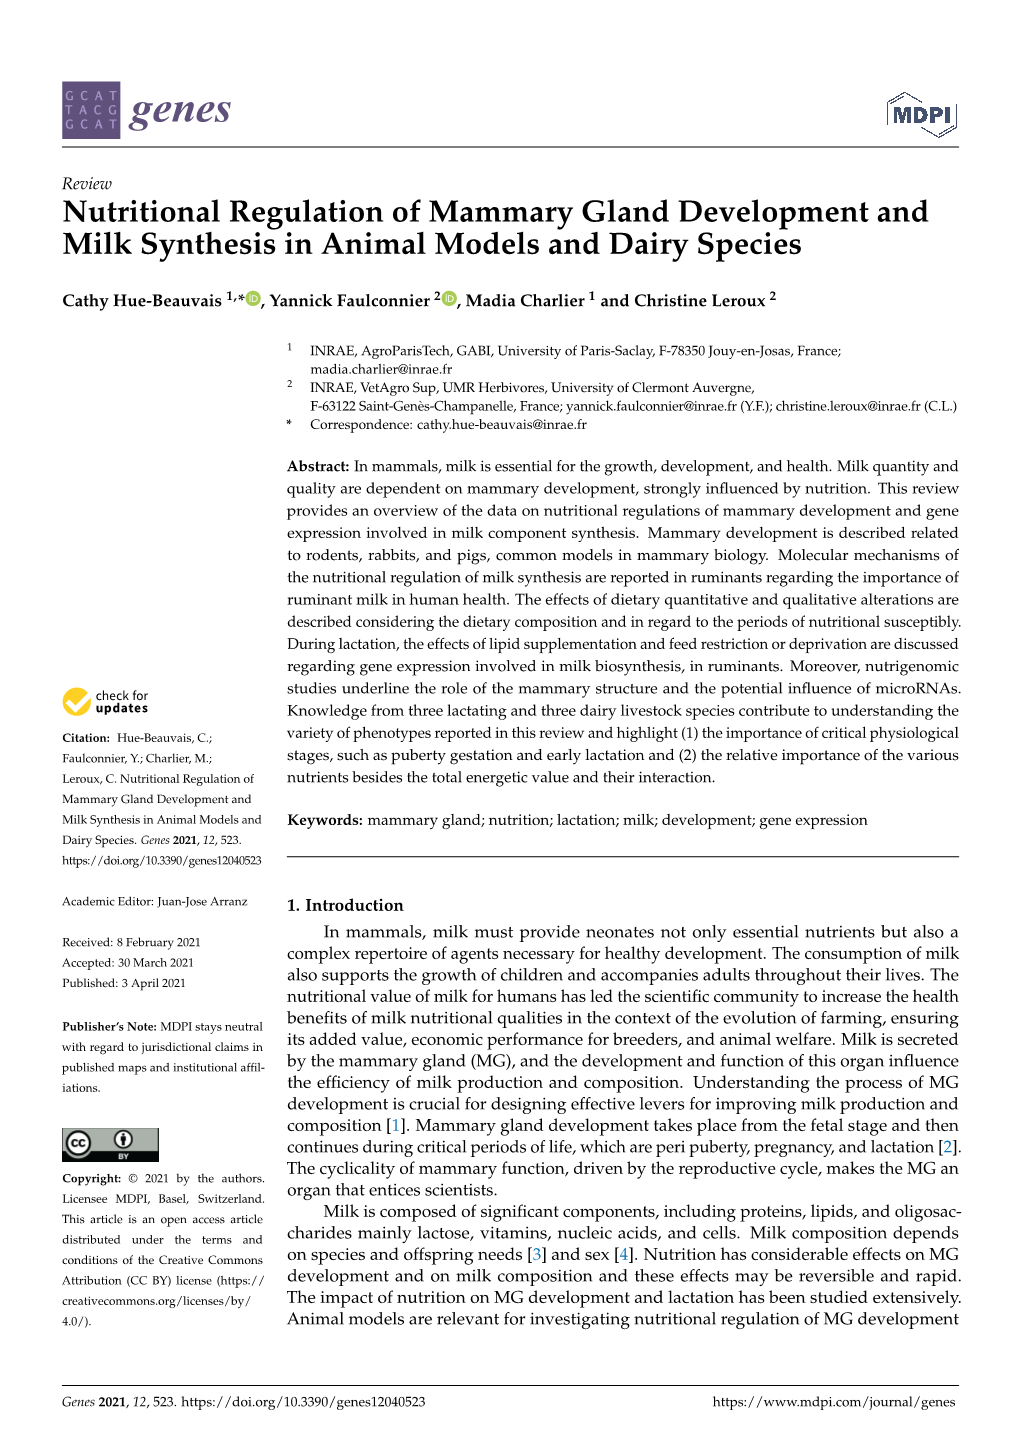 Nutritional Regulation of Mammary Gland Development and Milk Synthesis in Animal Models and Dairy Species